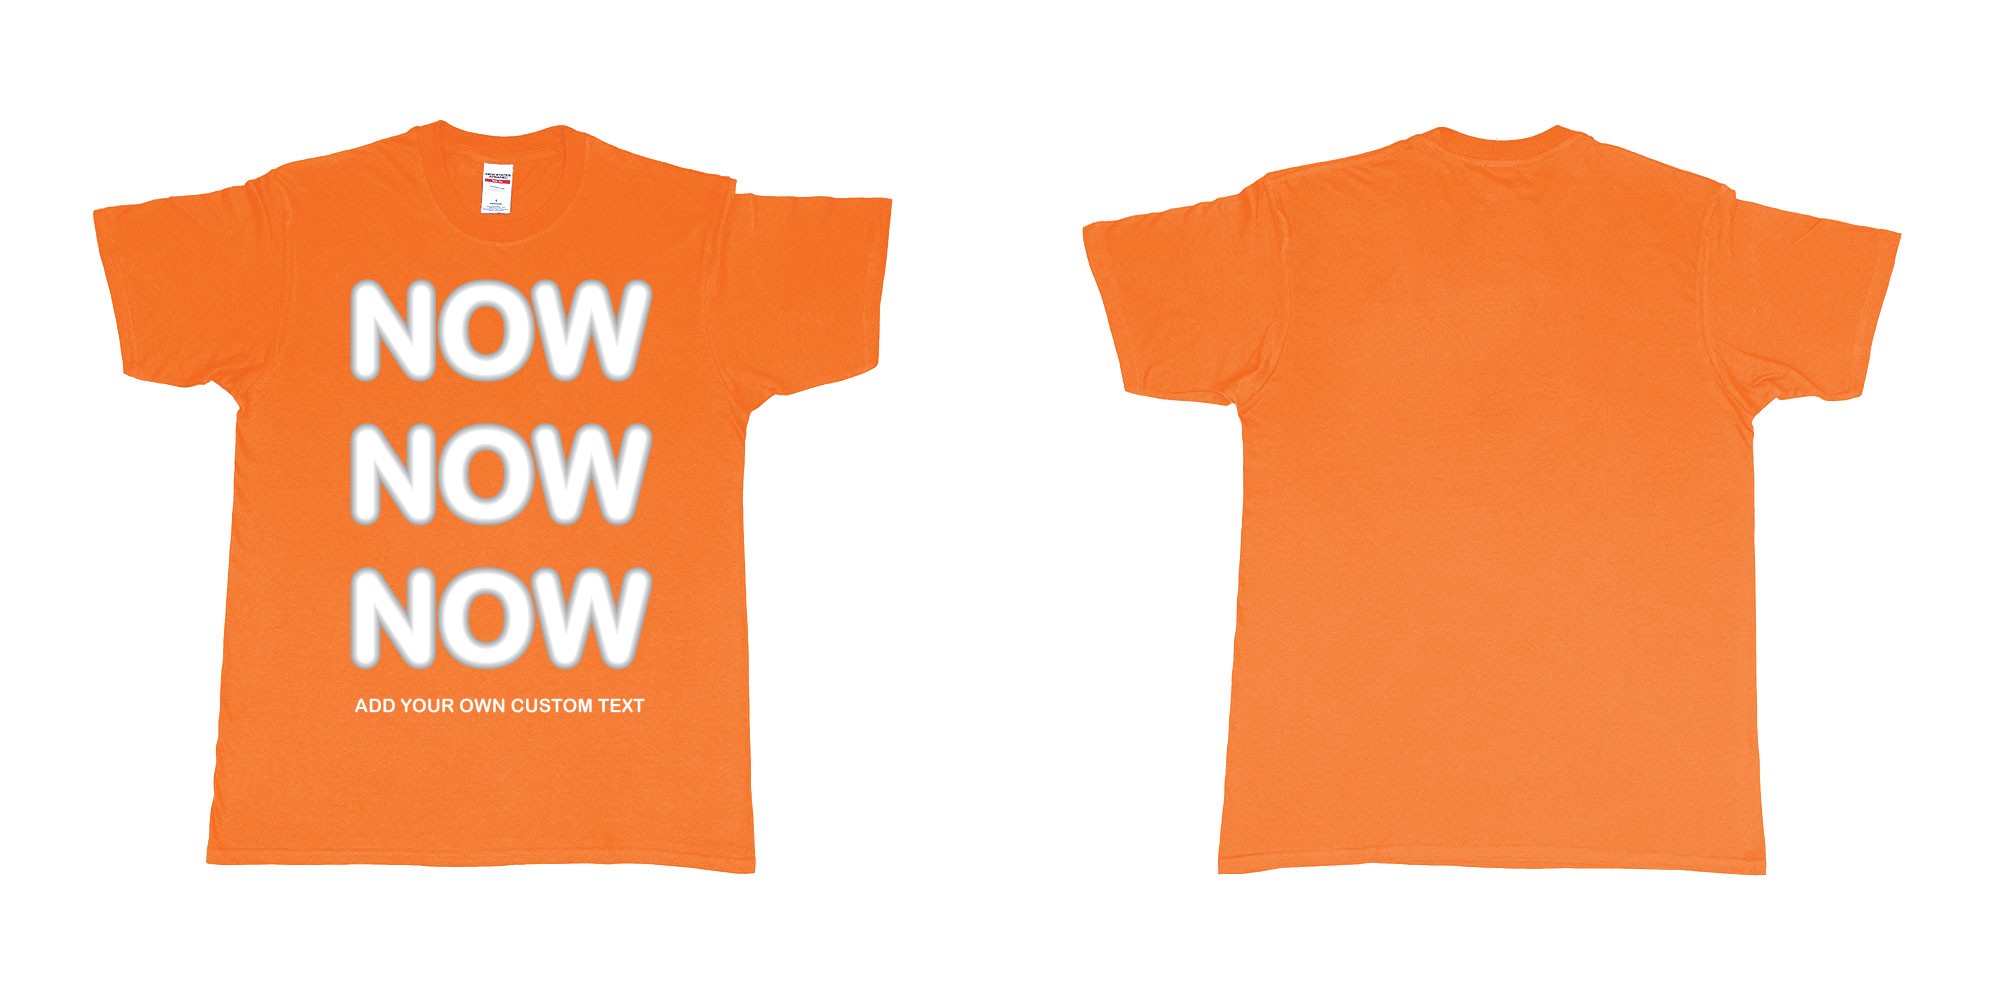 Custom tshirt design now now now add custom text tees in fabric color orange choice your own text made in Bali by The Pirate Way